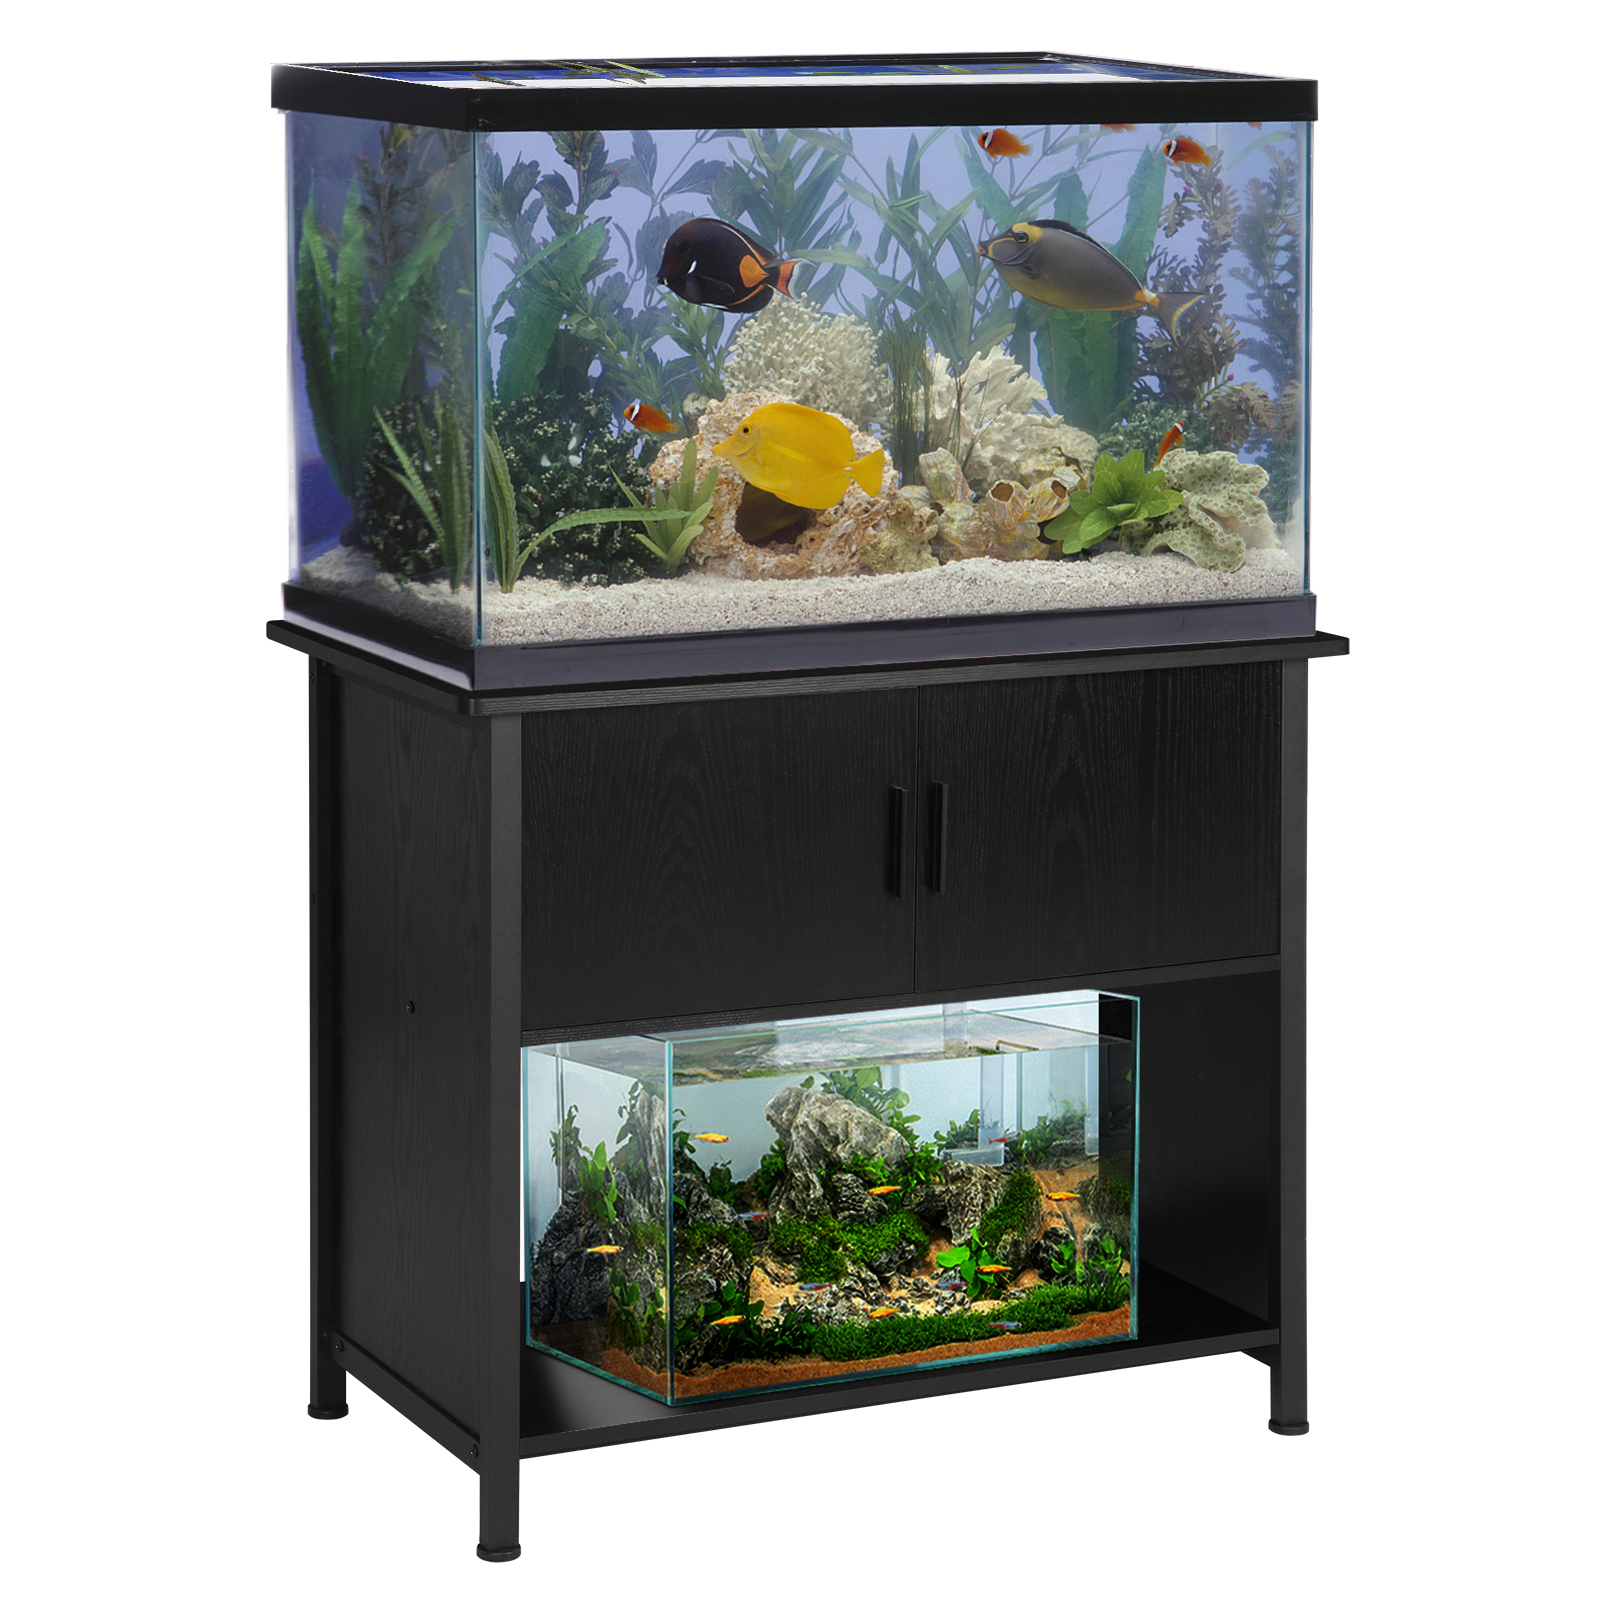 Aquarium Stand 40 Gallon Metal Fish Tank Stand Cabinet with Storage Shelf, W36.6*D18.9*H31.5, Black Oak Grain (Stand Only)